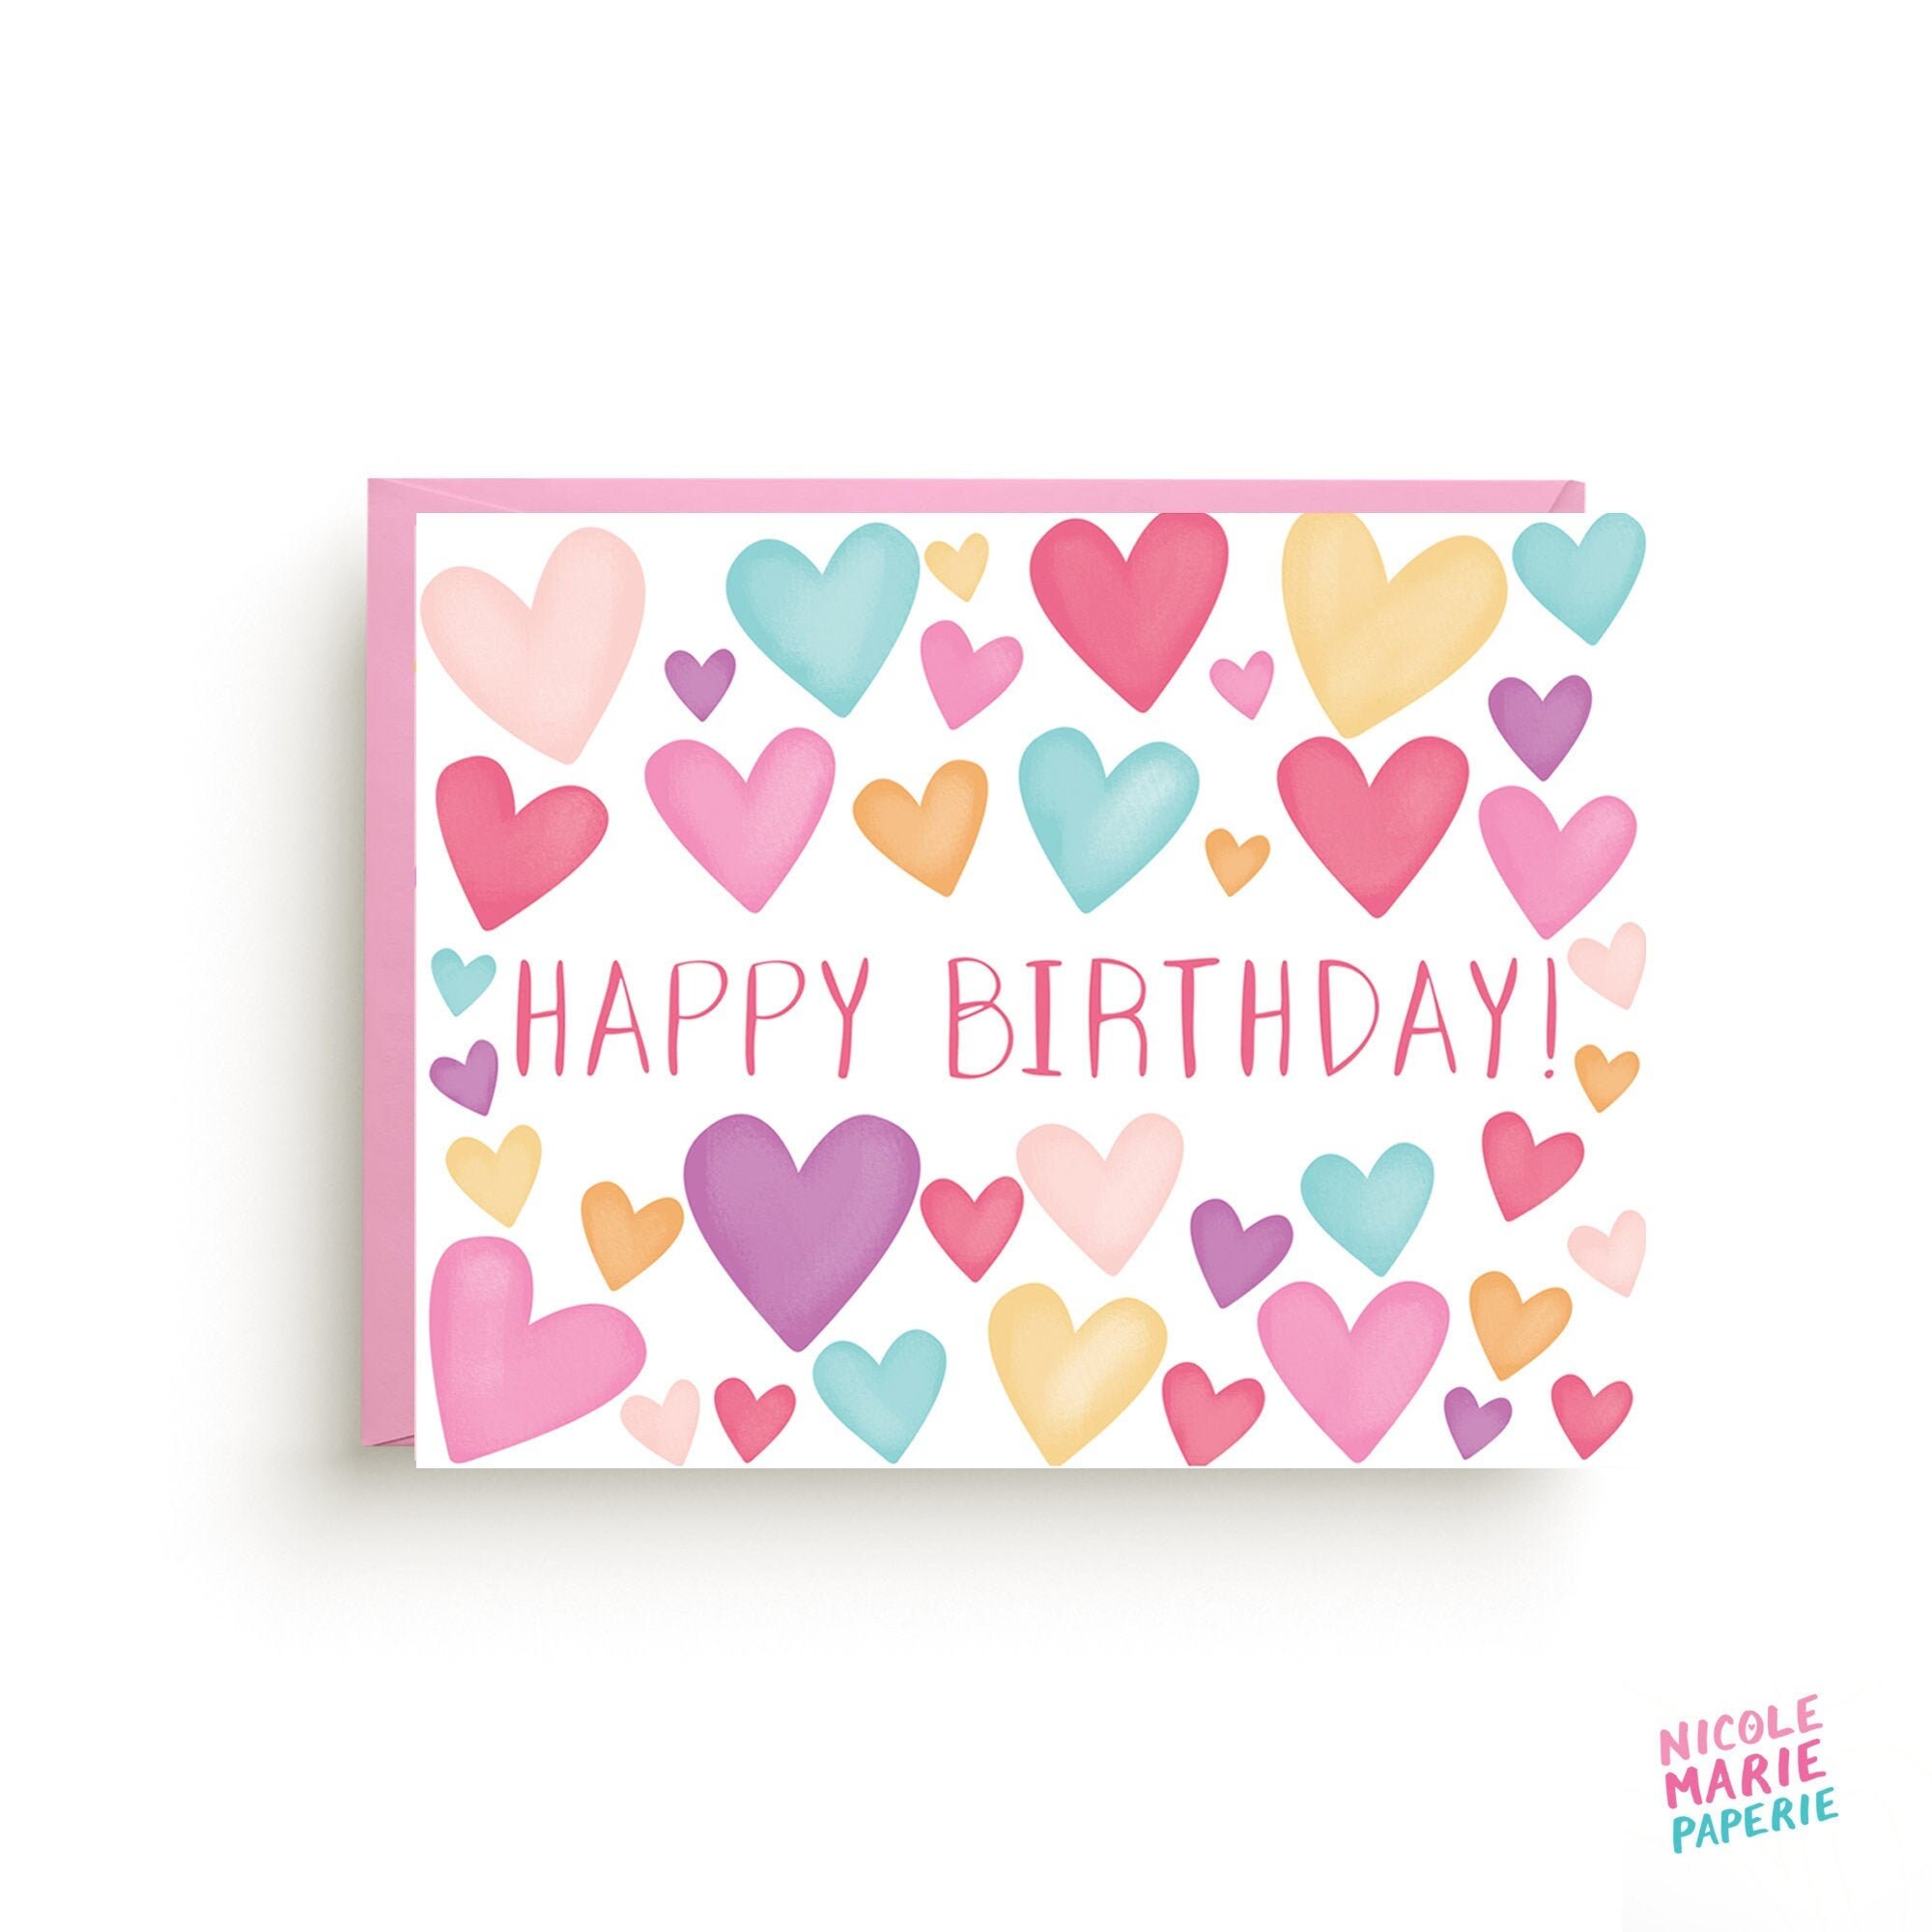 ON SALE Pink Hearts Birthday Card | Etsy